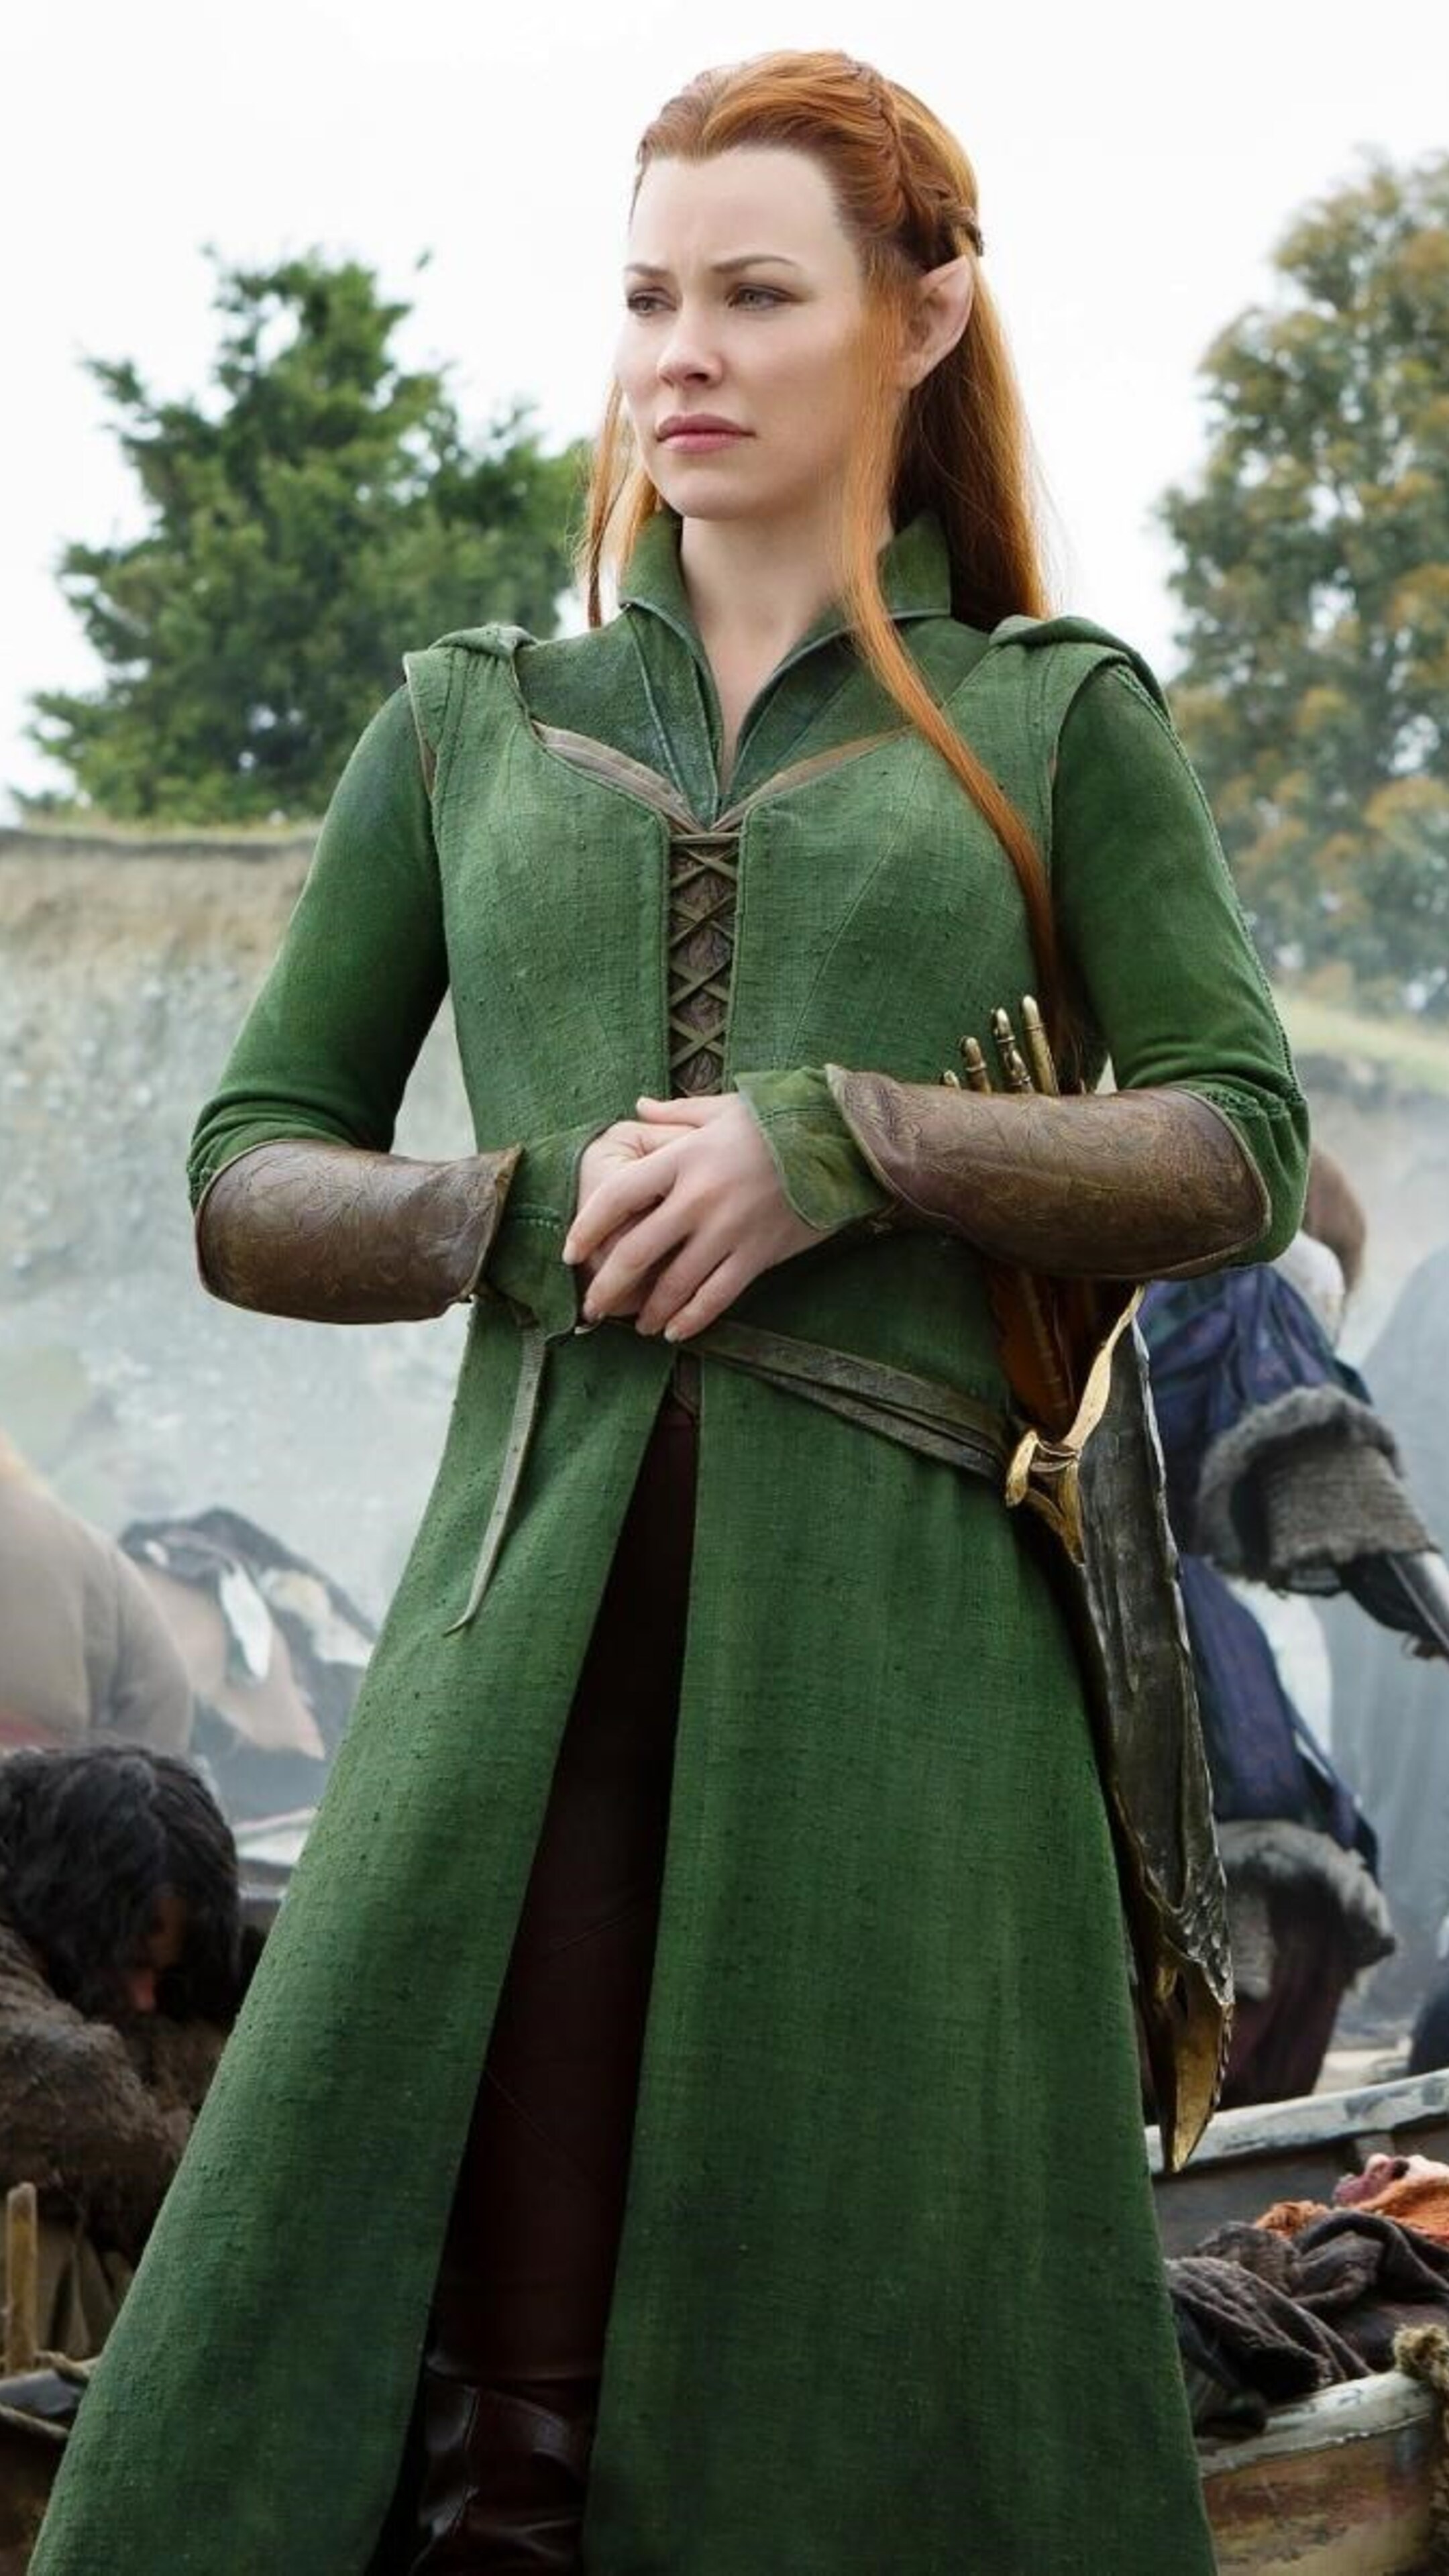 The Hobbit (Movie): Tauriel, A Wood-elf of Mirkwood, A non-canonical character. 2160x3840 4K Wallpaper.